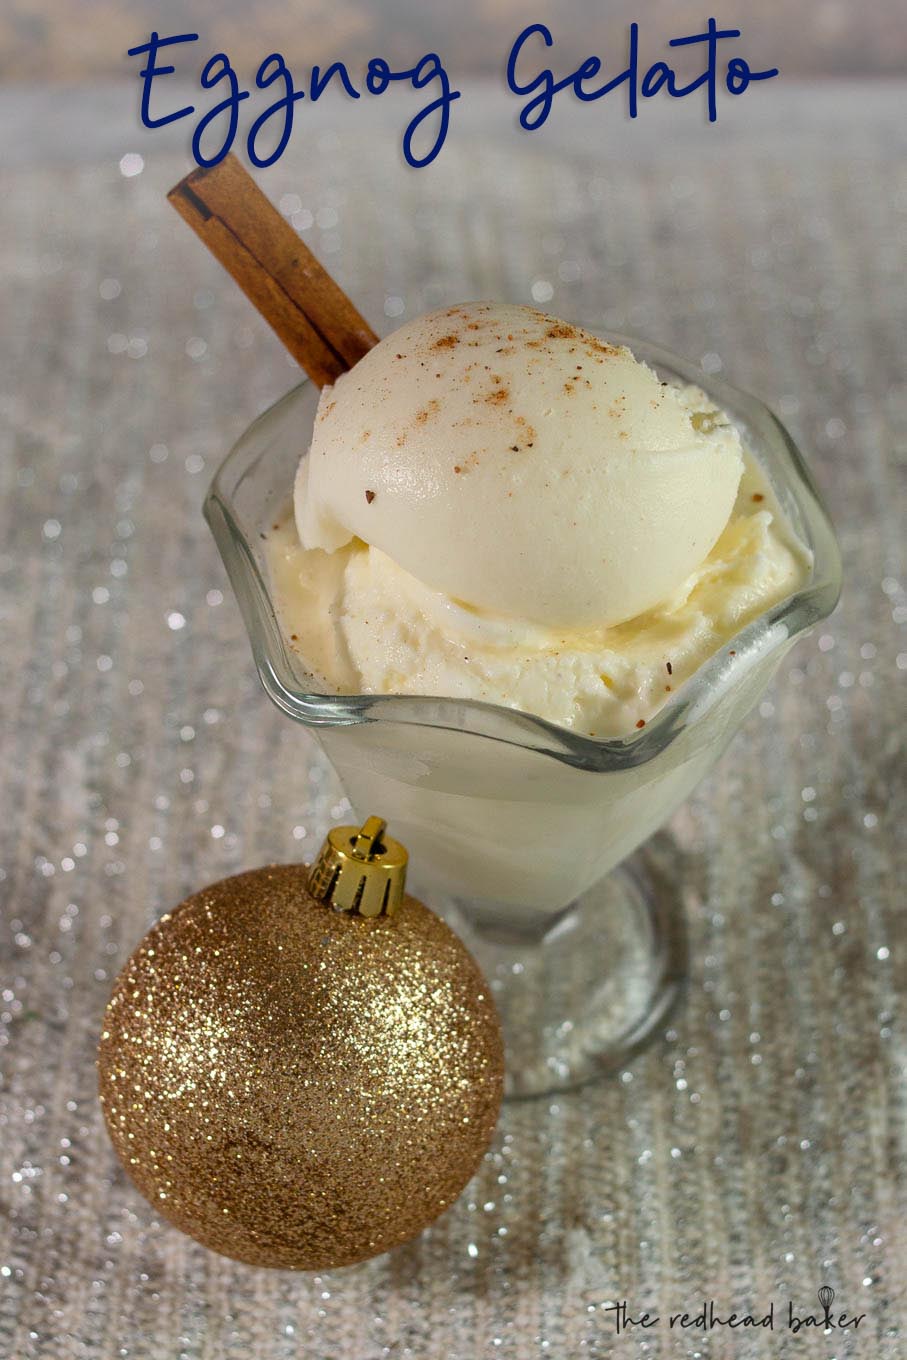 A dish of eggnog gelato with a cinnamon stick, and a glittery gold ornament in front of the dish